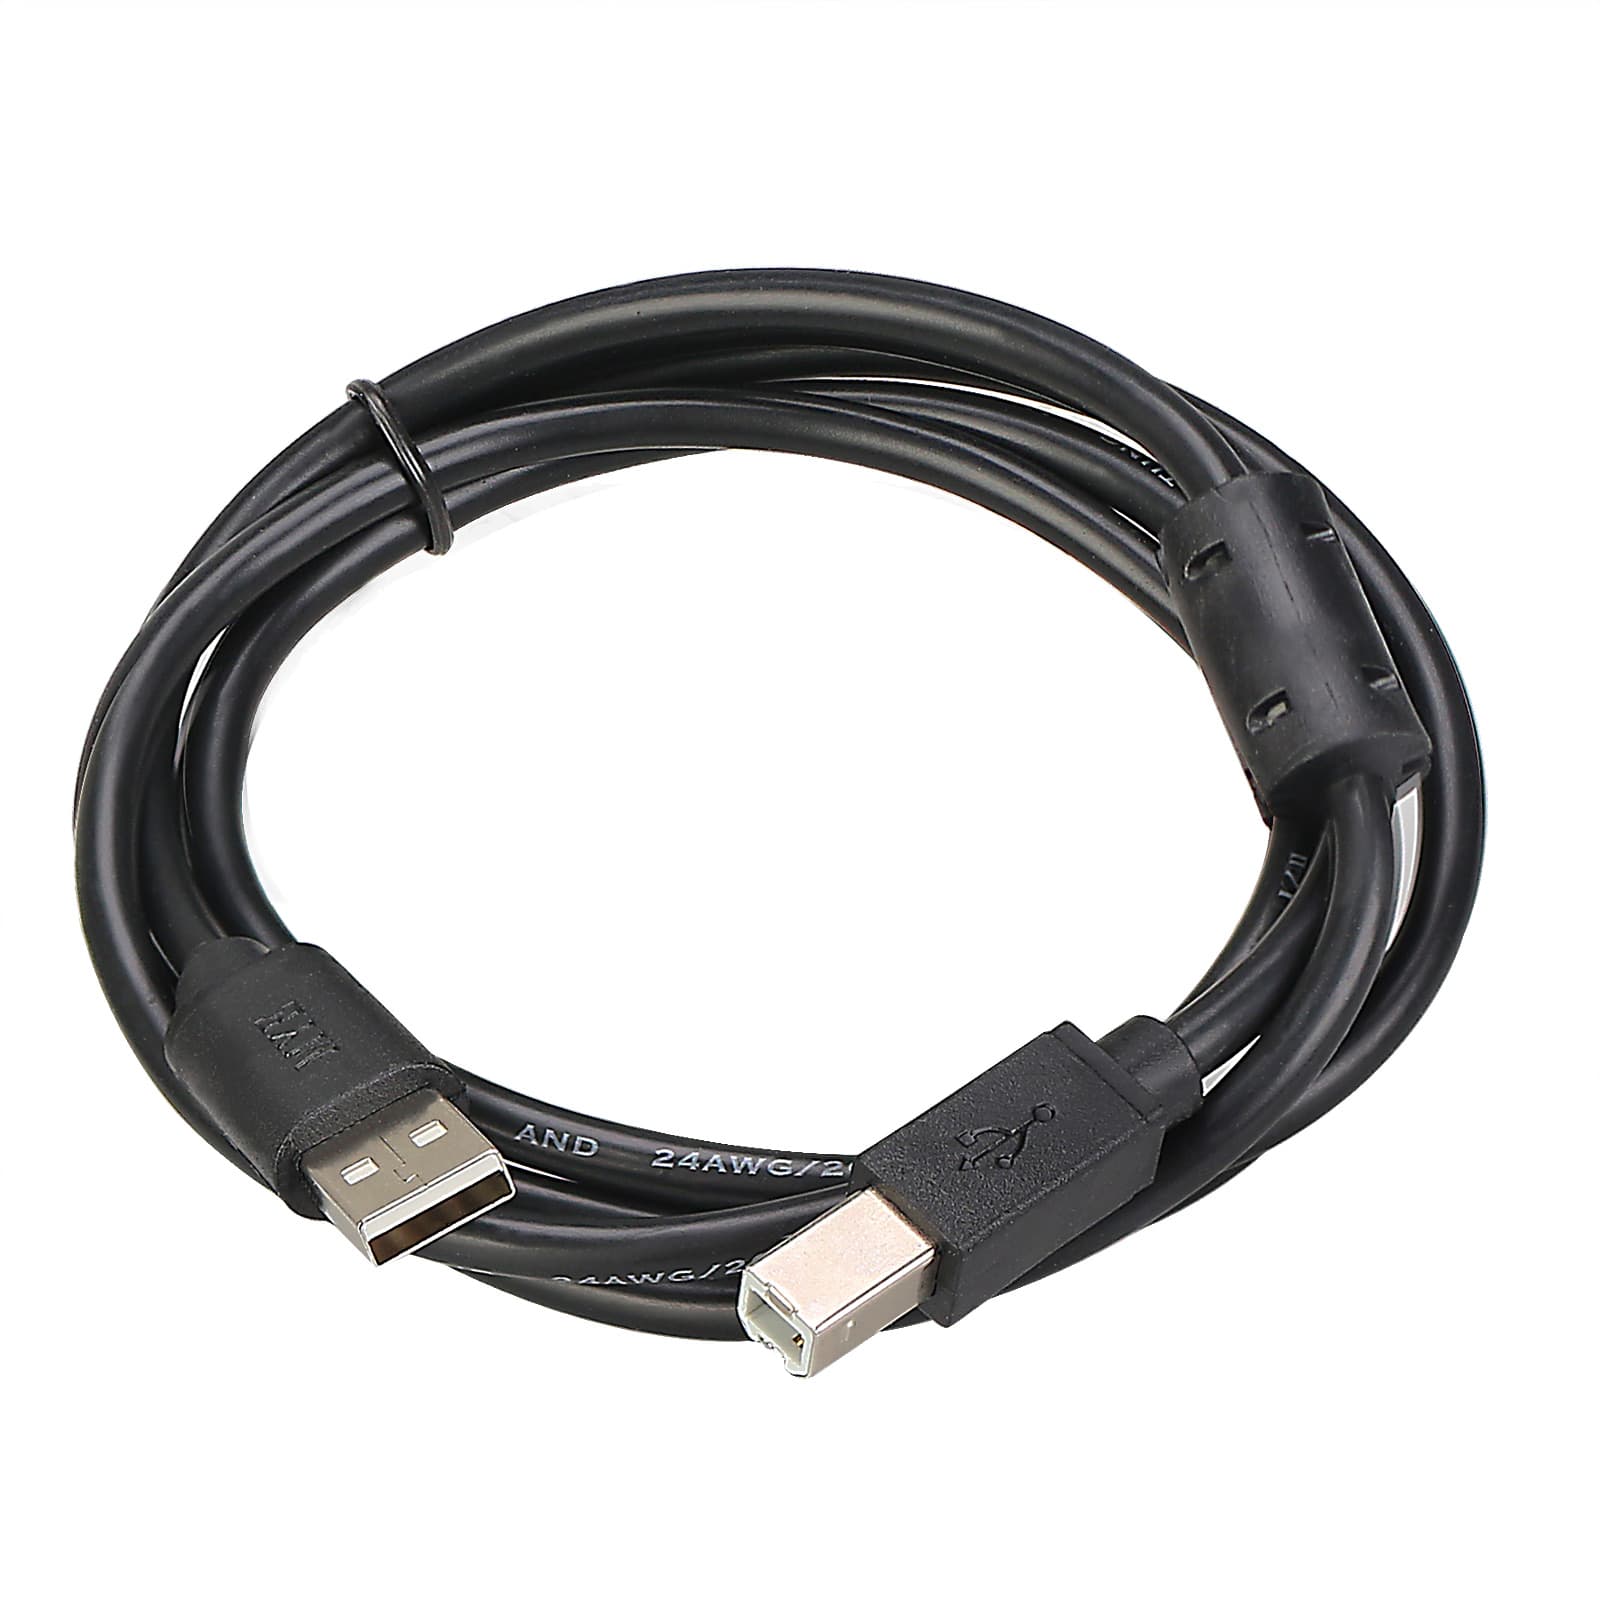 PC74 USB Programming Cable for Retevis RT74 RT92